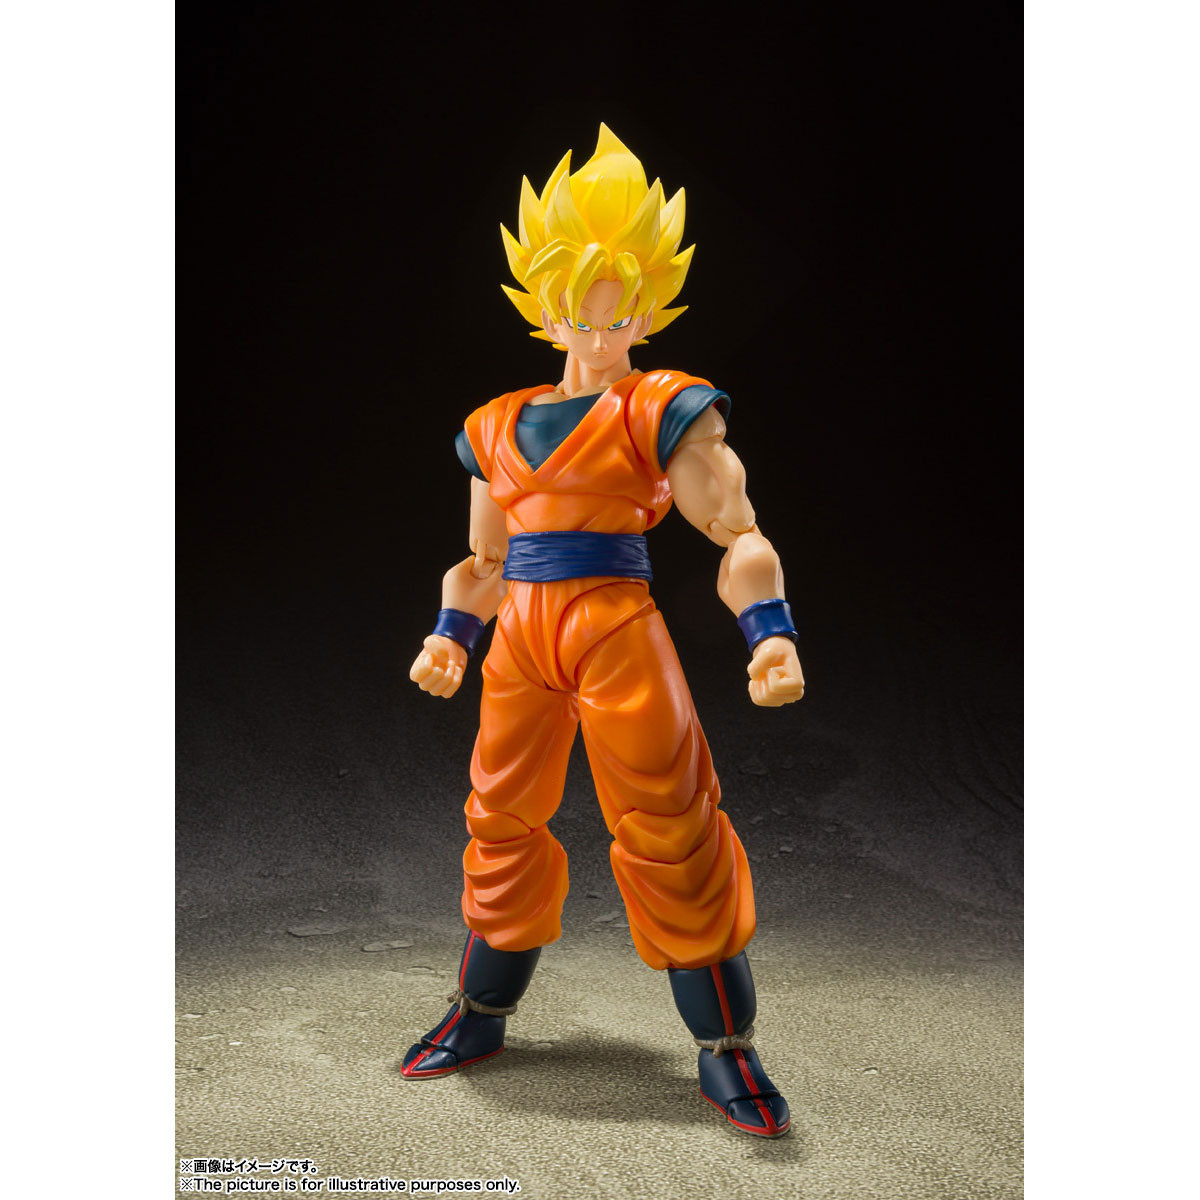 Details about   BANDAI S.H.FIGUARTS ULTIMATE GOHAN DRAGON BALL SHF ACTION FIGURE 